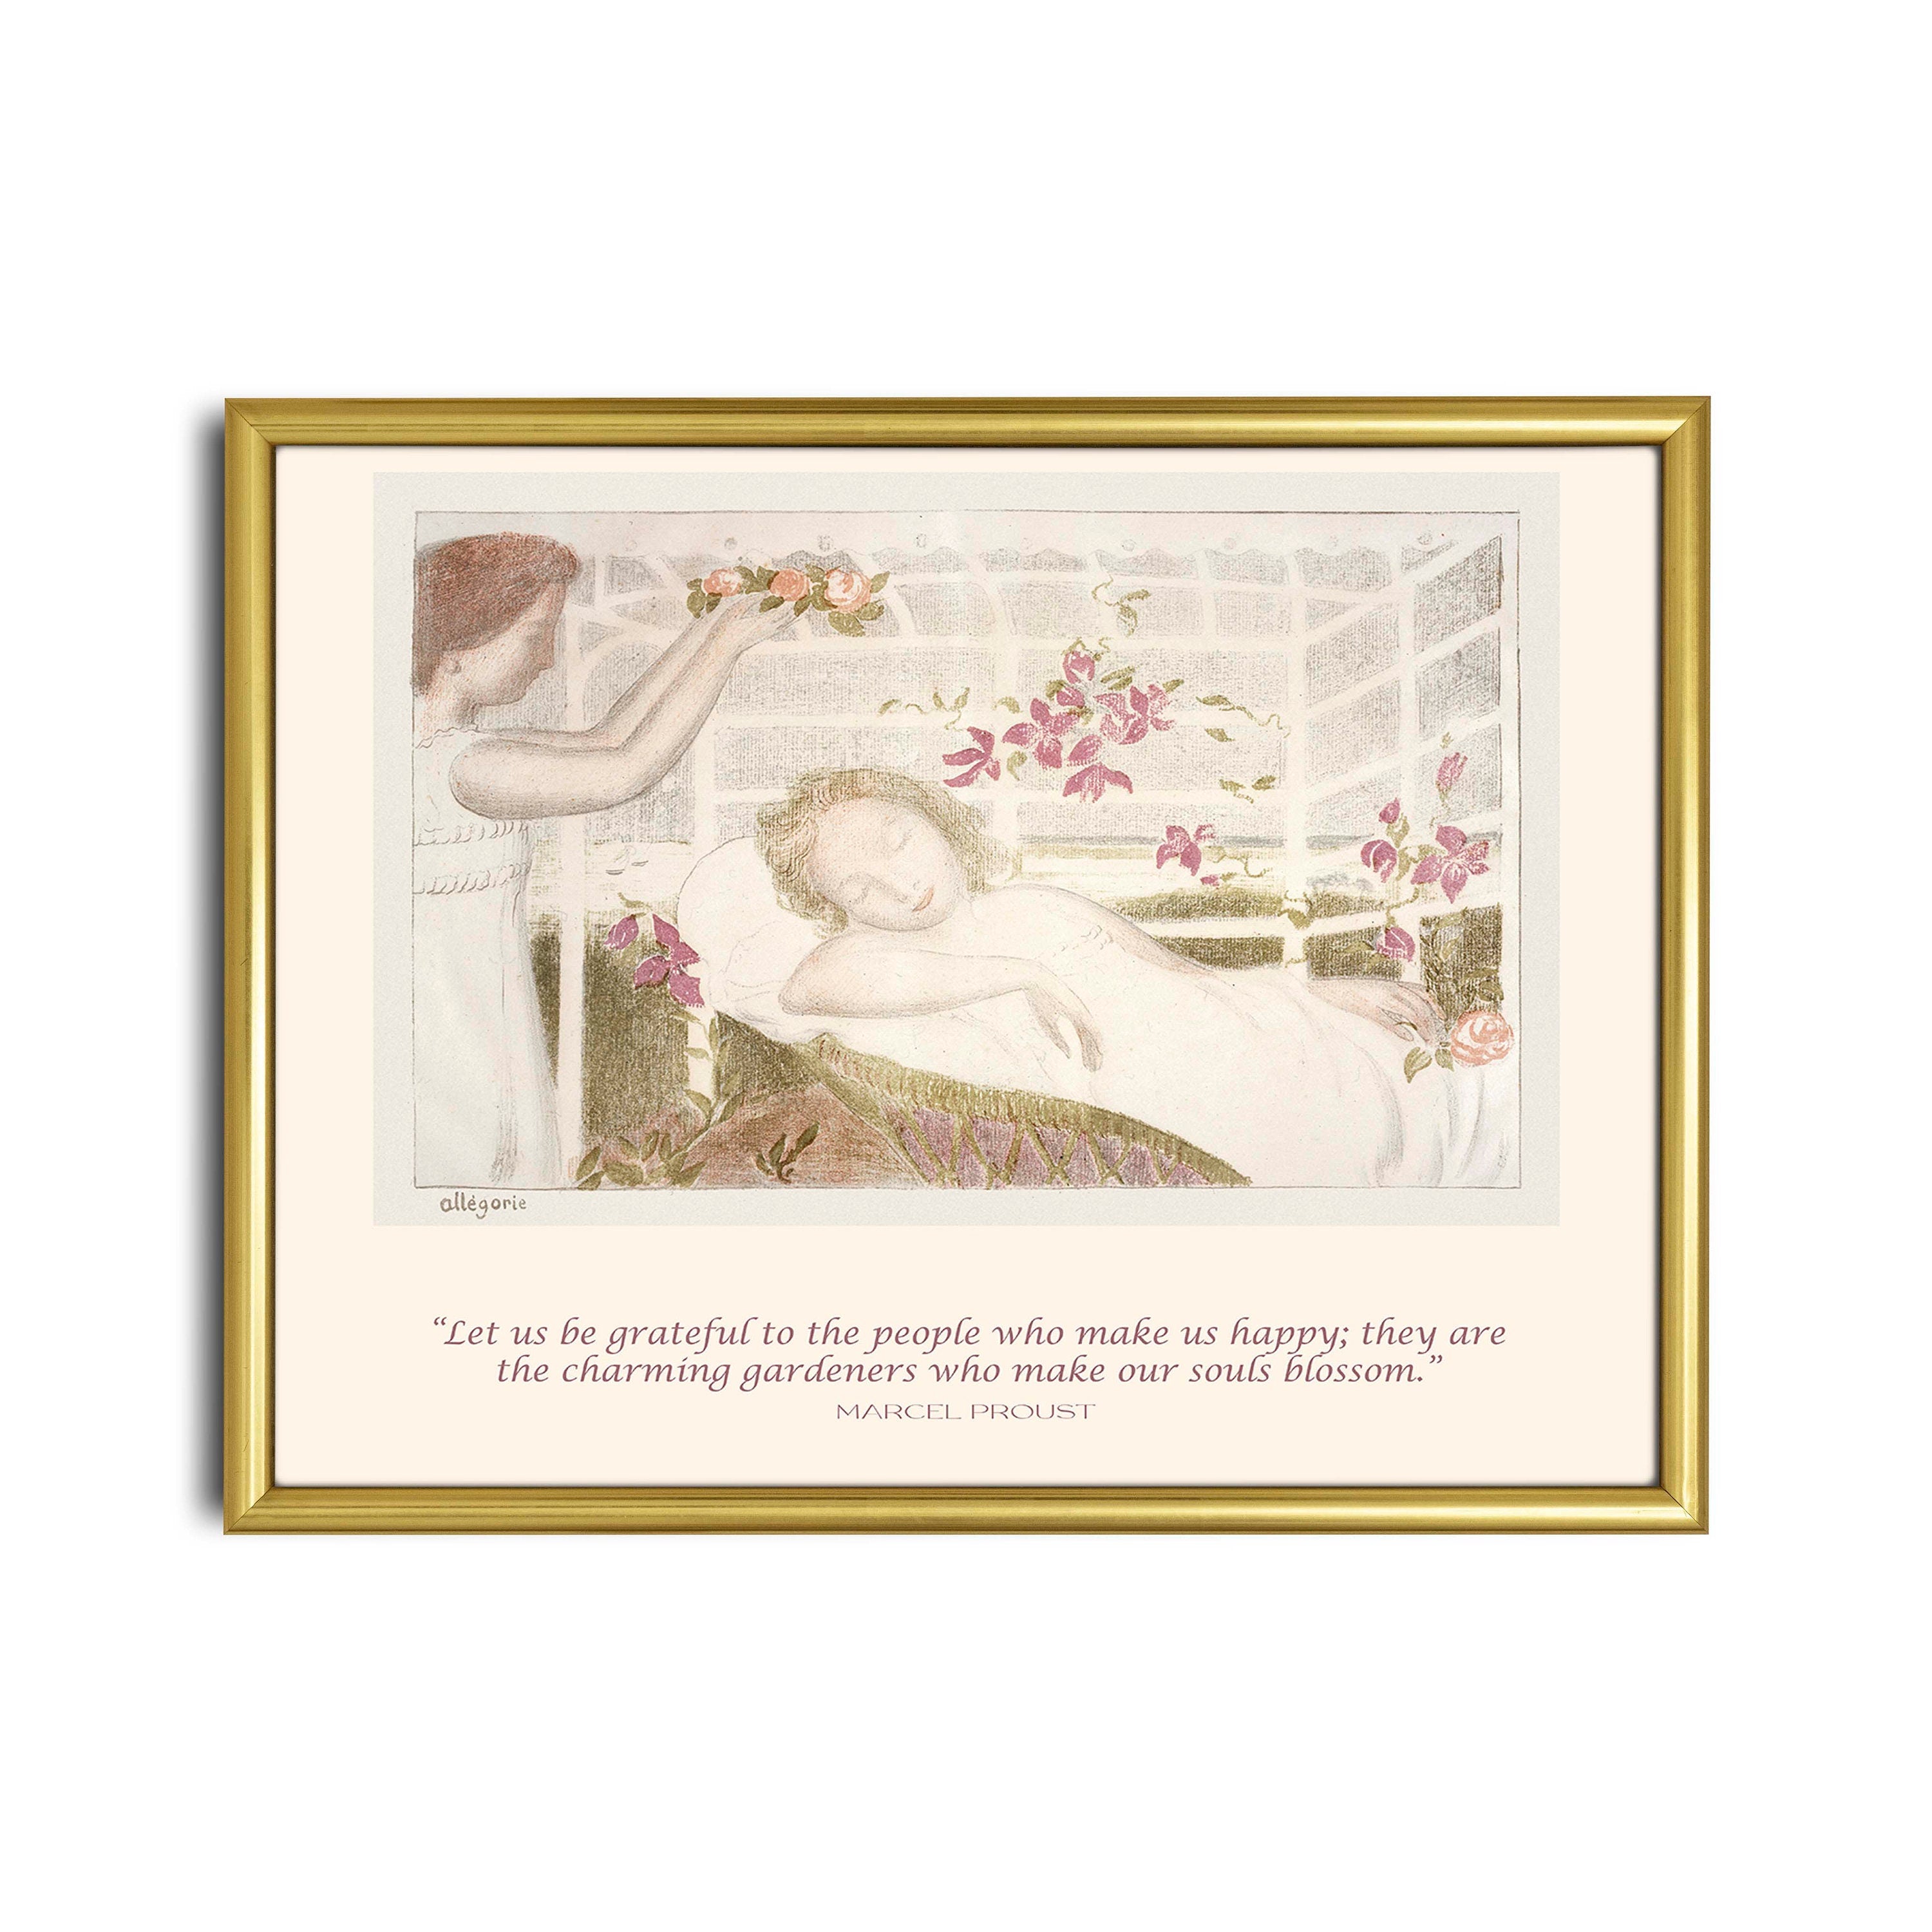 Marcel Proust Inspirational Gratitude Quote, Maurice Denis Fine Art Prints - Be grateful to the people who make us happy